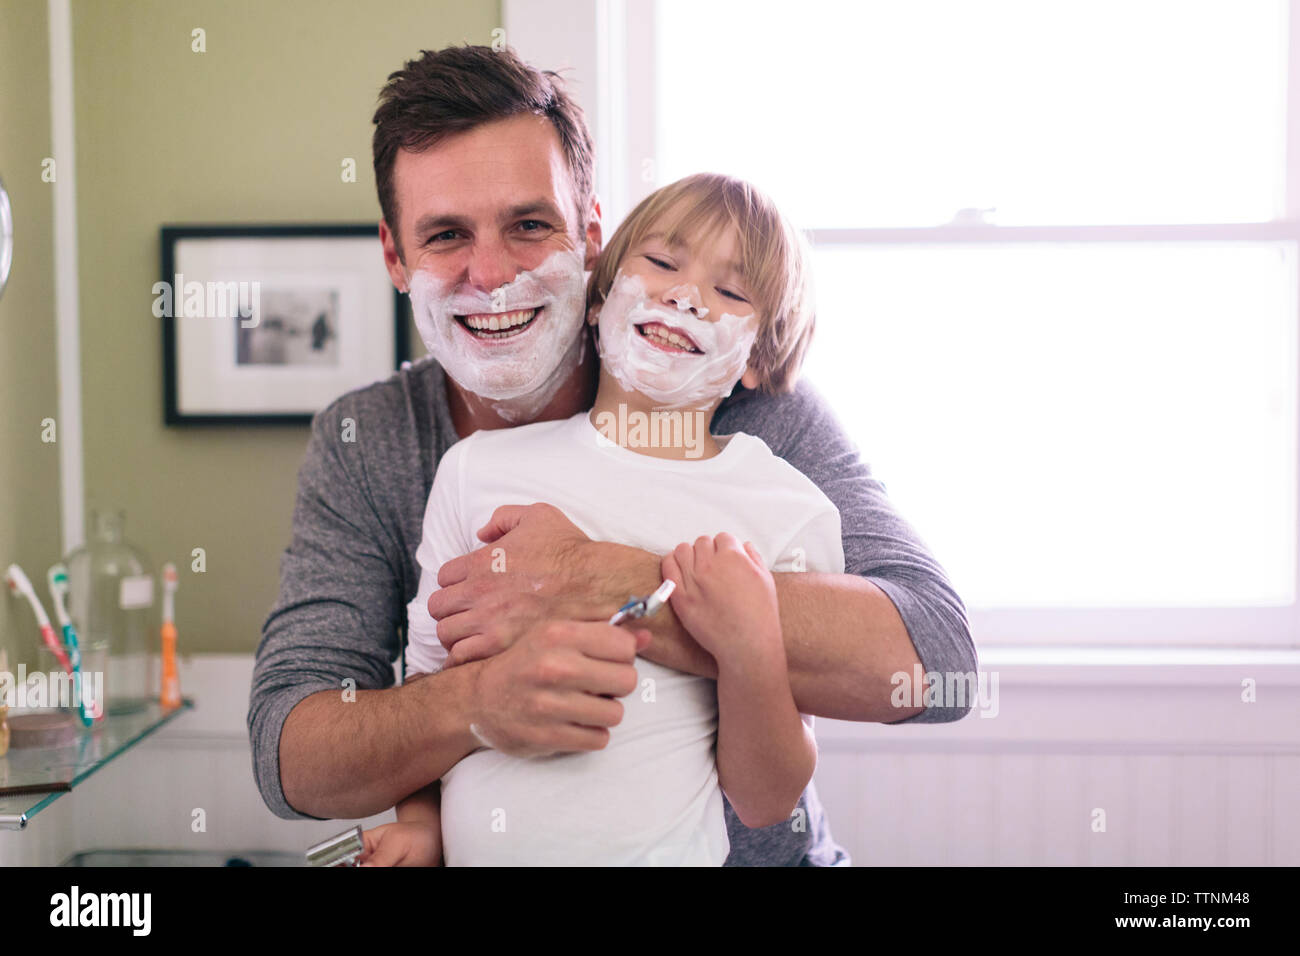 Portrait of happy father and son with shaving cream on face standing in bathroom Stock Photo